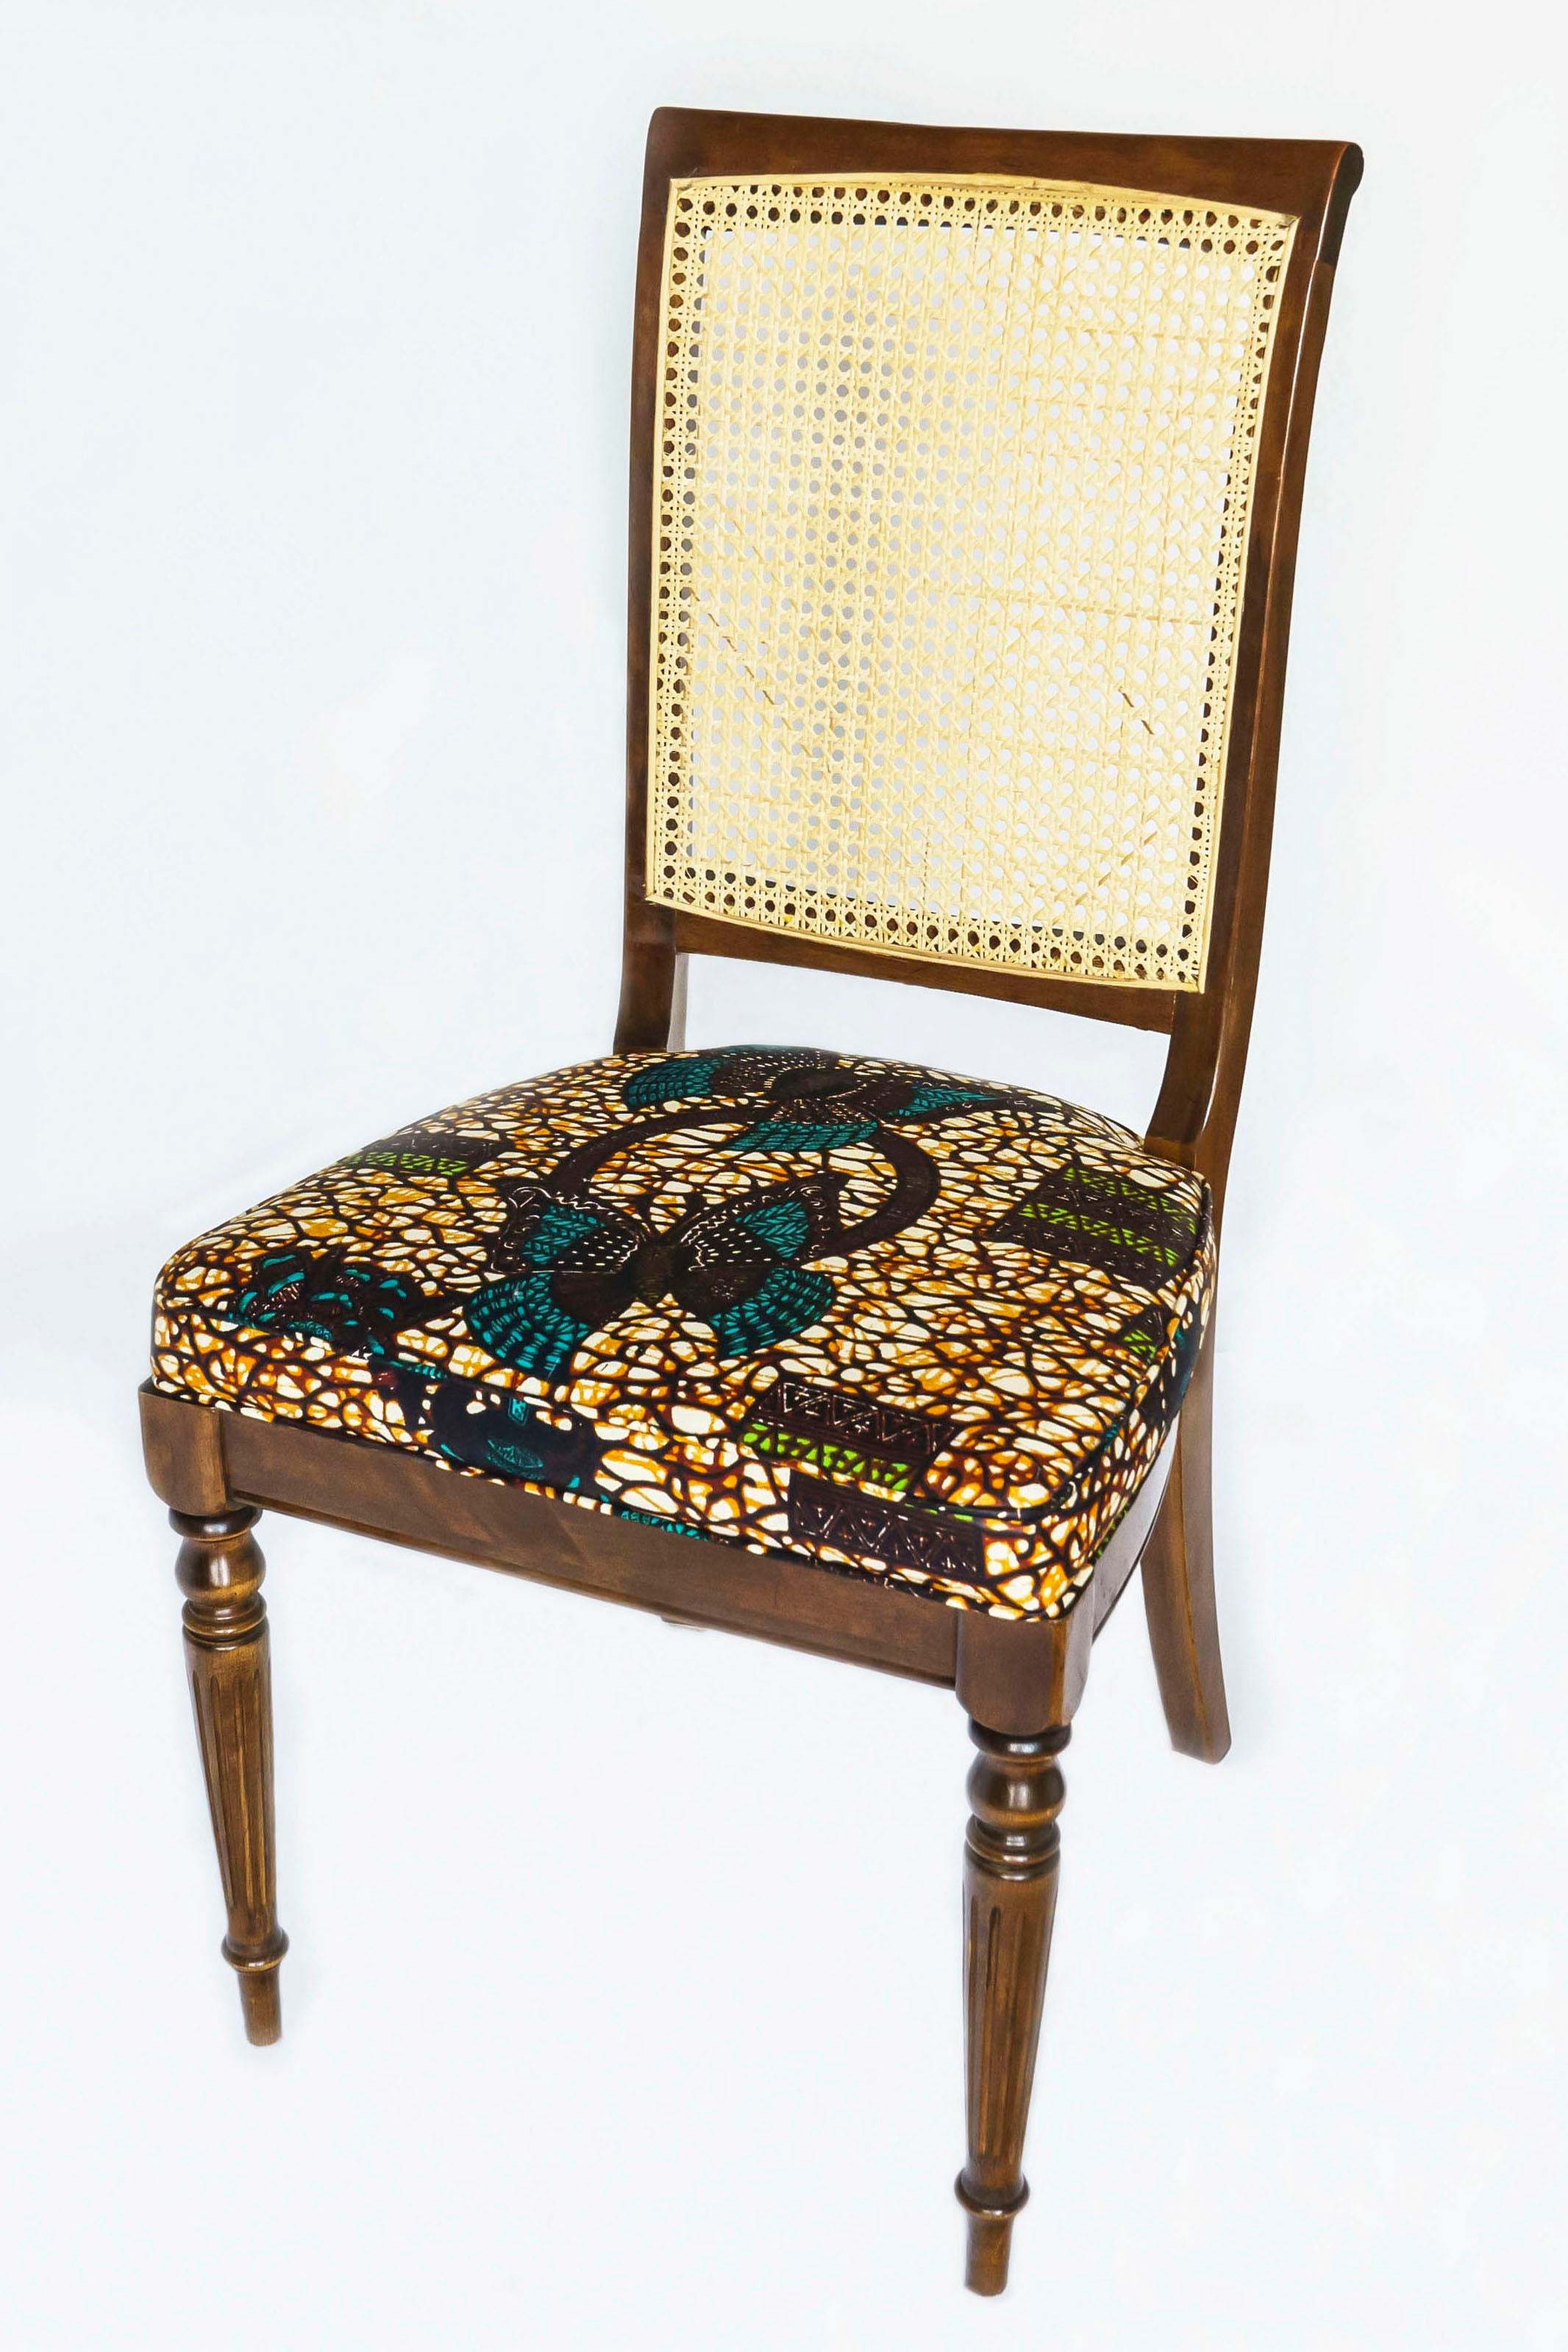 Two Classic Cane Back Chairs w/ African Butterfly Block Print Seat